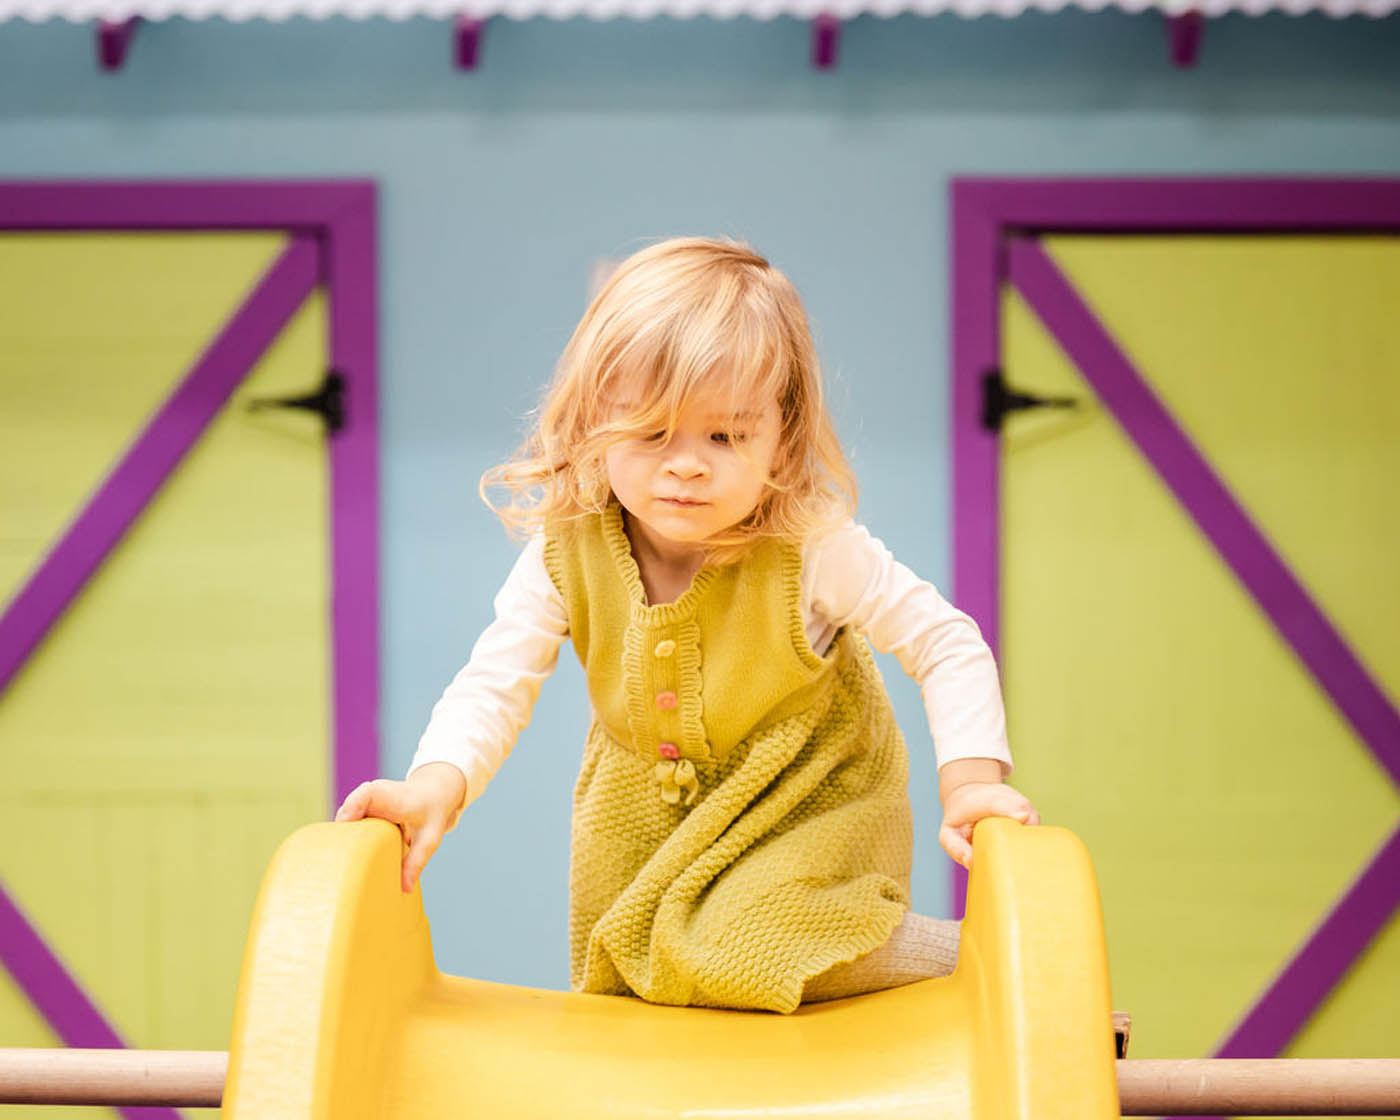 A toddler playing on a yellow slide at Romp n' Roll St. Petersburg's classes for 3 year olds in St. Petersburg, FL